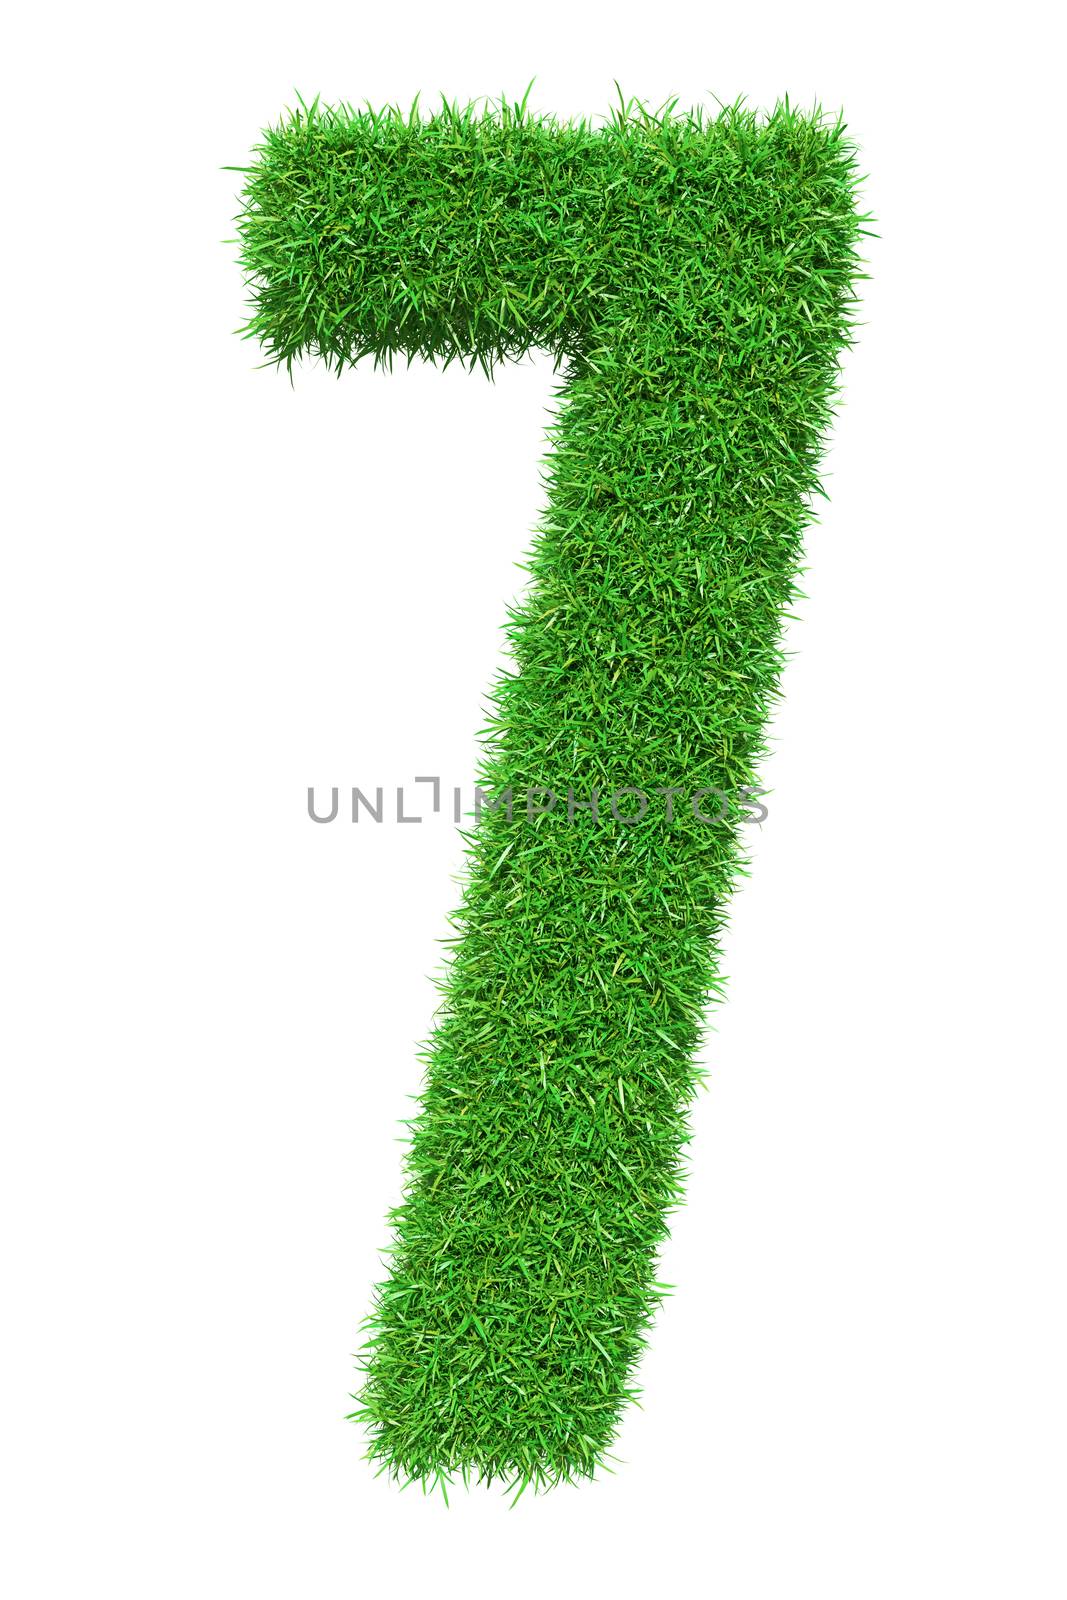 Green grass number 7, isolated on white background. 3D illustration